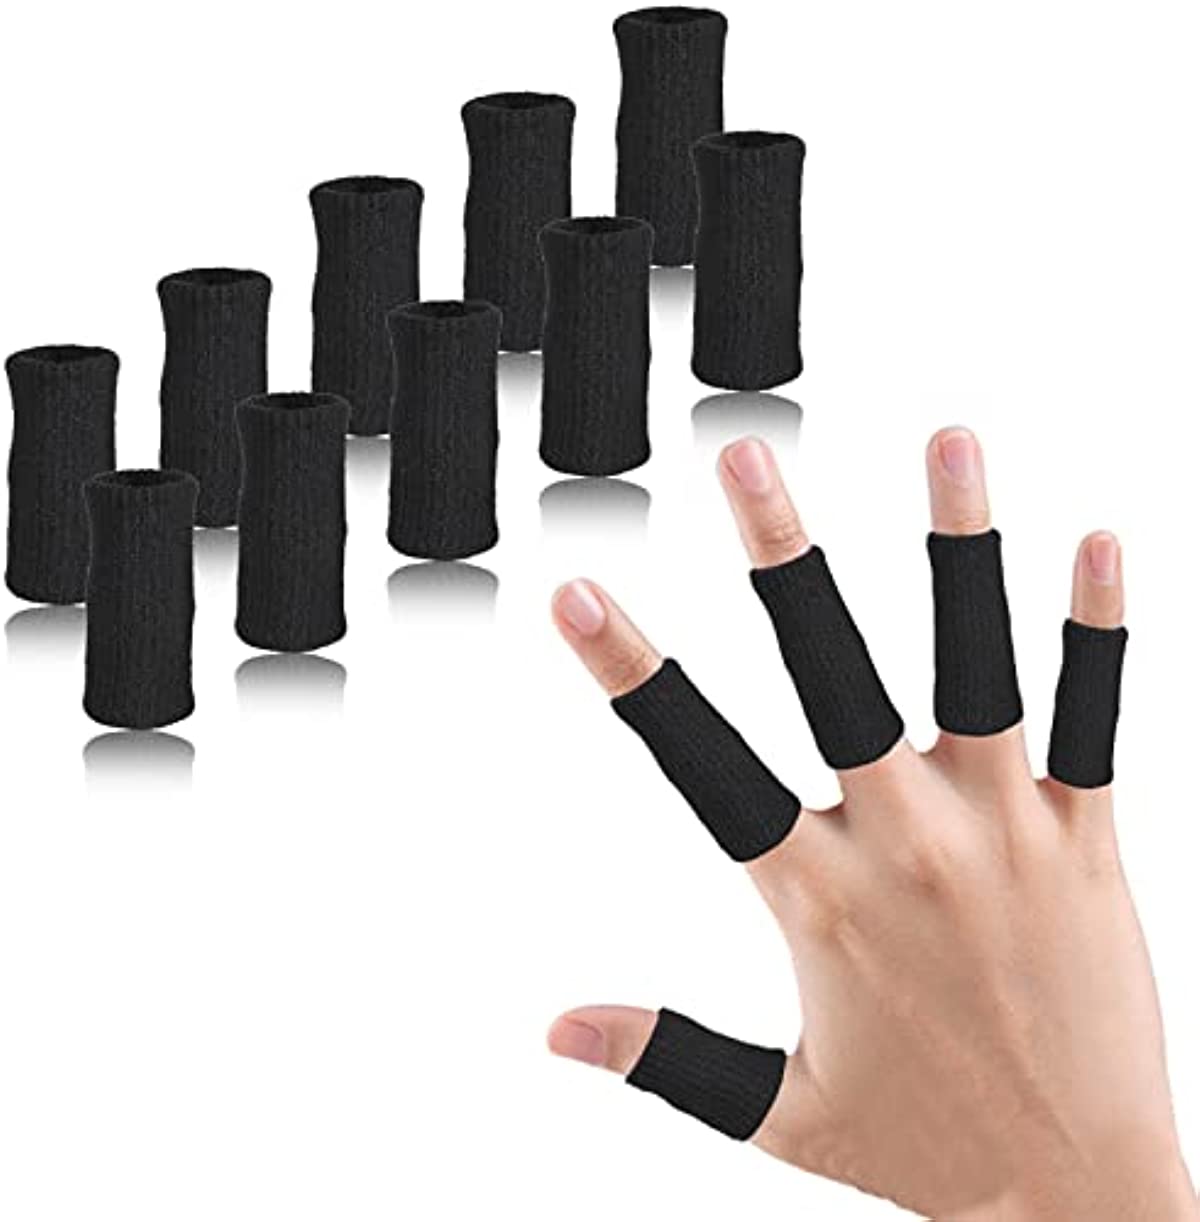 10Pcs Finger Compression Sleeves Support, EDNYZAKRN Finger Sleeve Protectors Cots Thumb Brace for Trigger Finger Arthritis Swelling Basketball Sport, Breathable Elastic Pain Relief